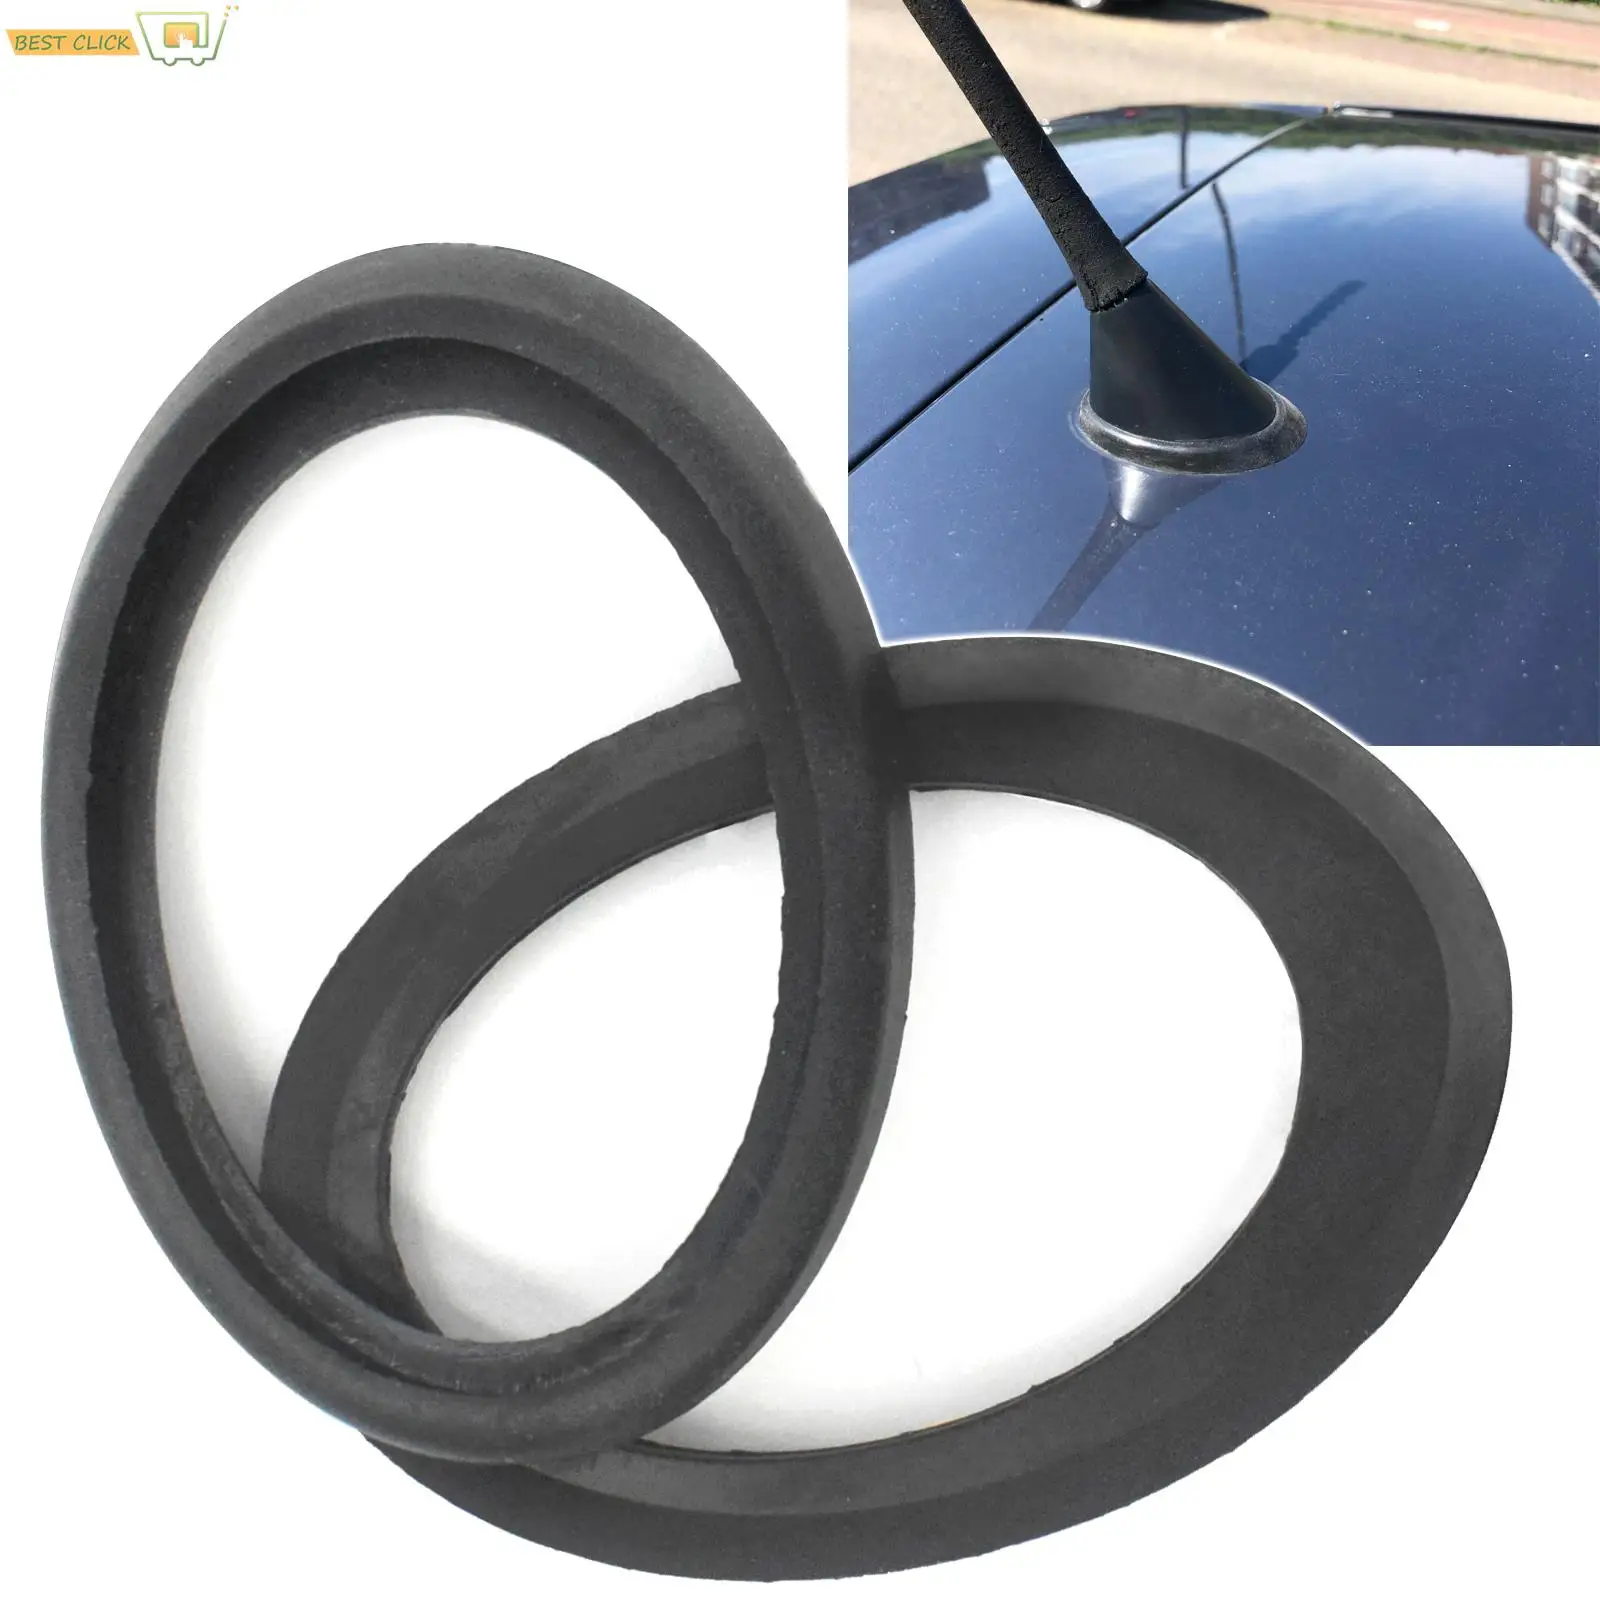 

Black Rubber Automobile Roof Aerial Antenna Gasket Seal For Audi Vauxhall Opel Sokda Toyota Ford Peugeot Chrysler Mitsubishi